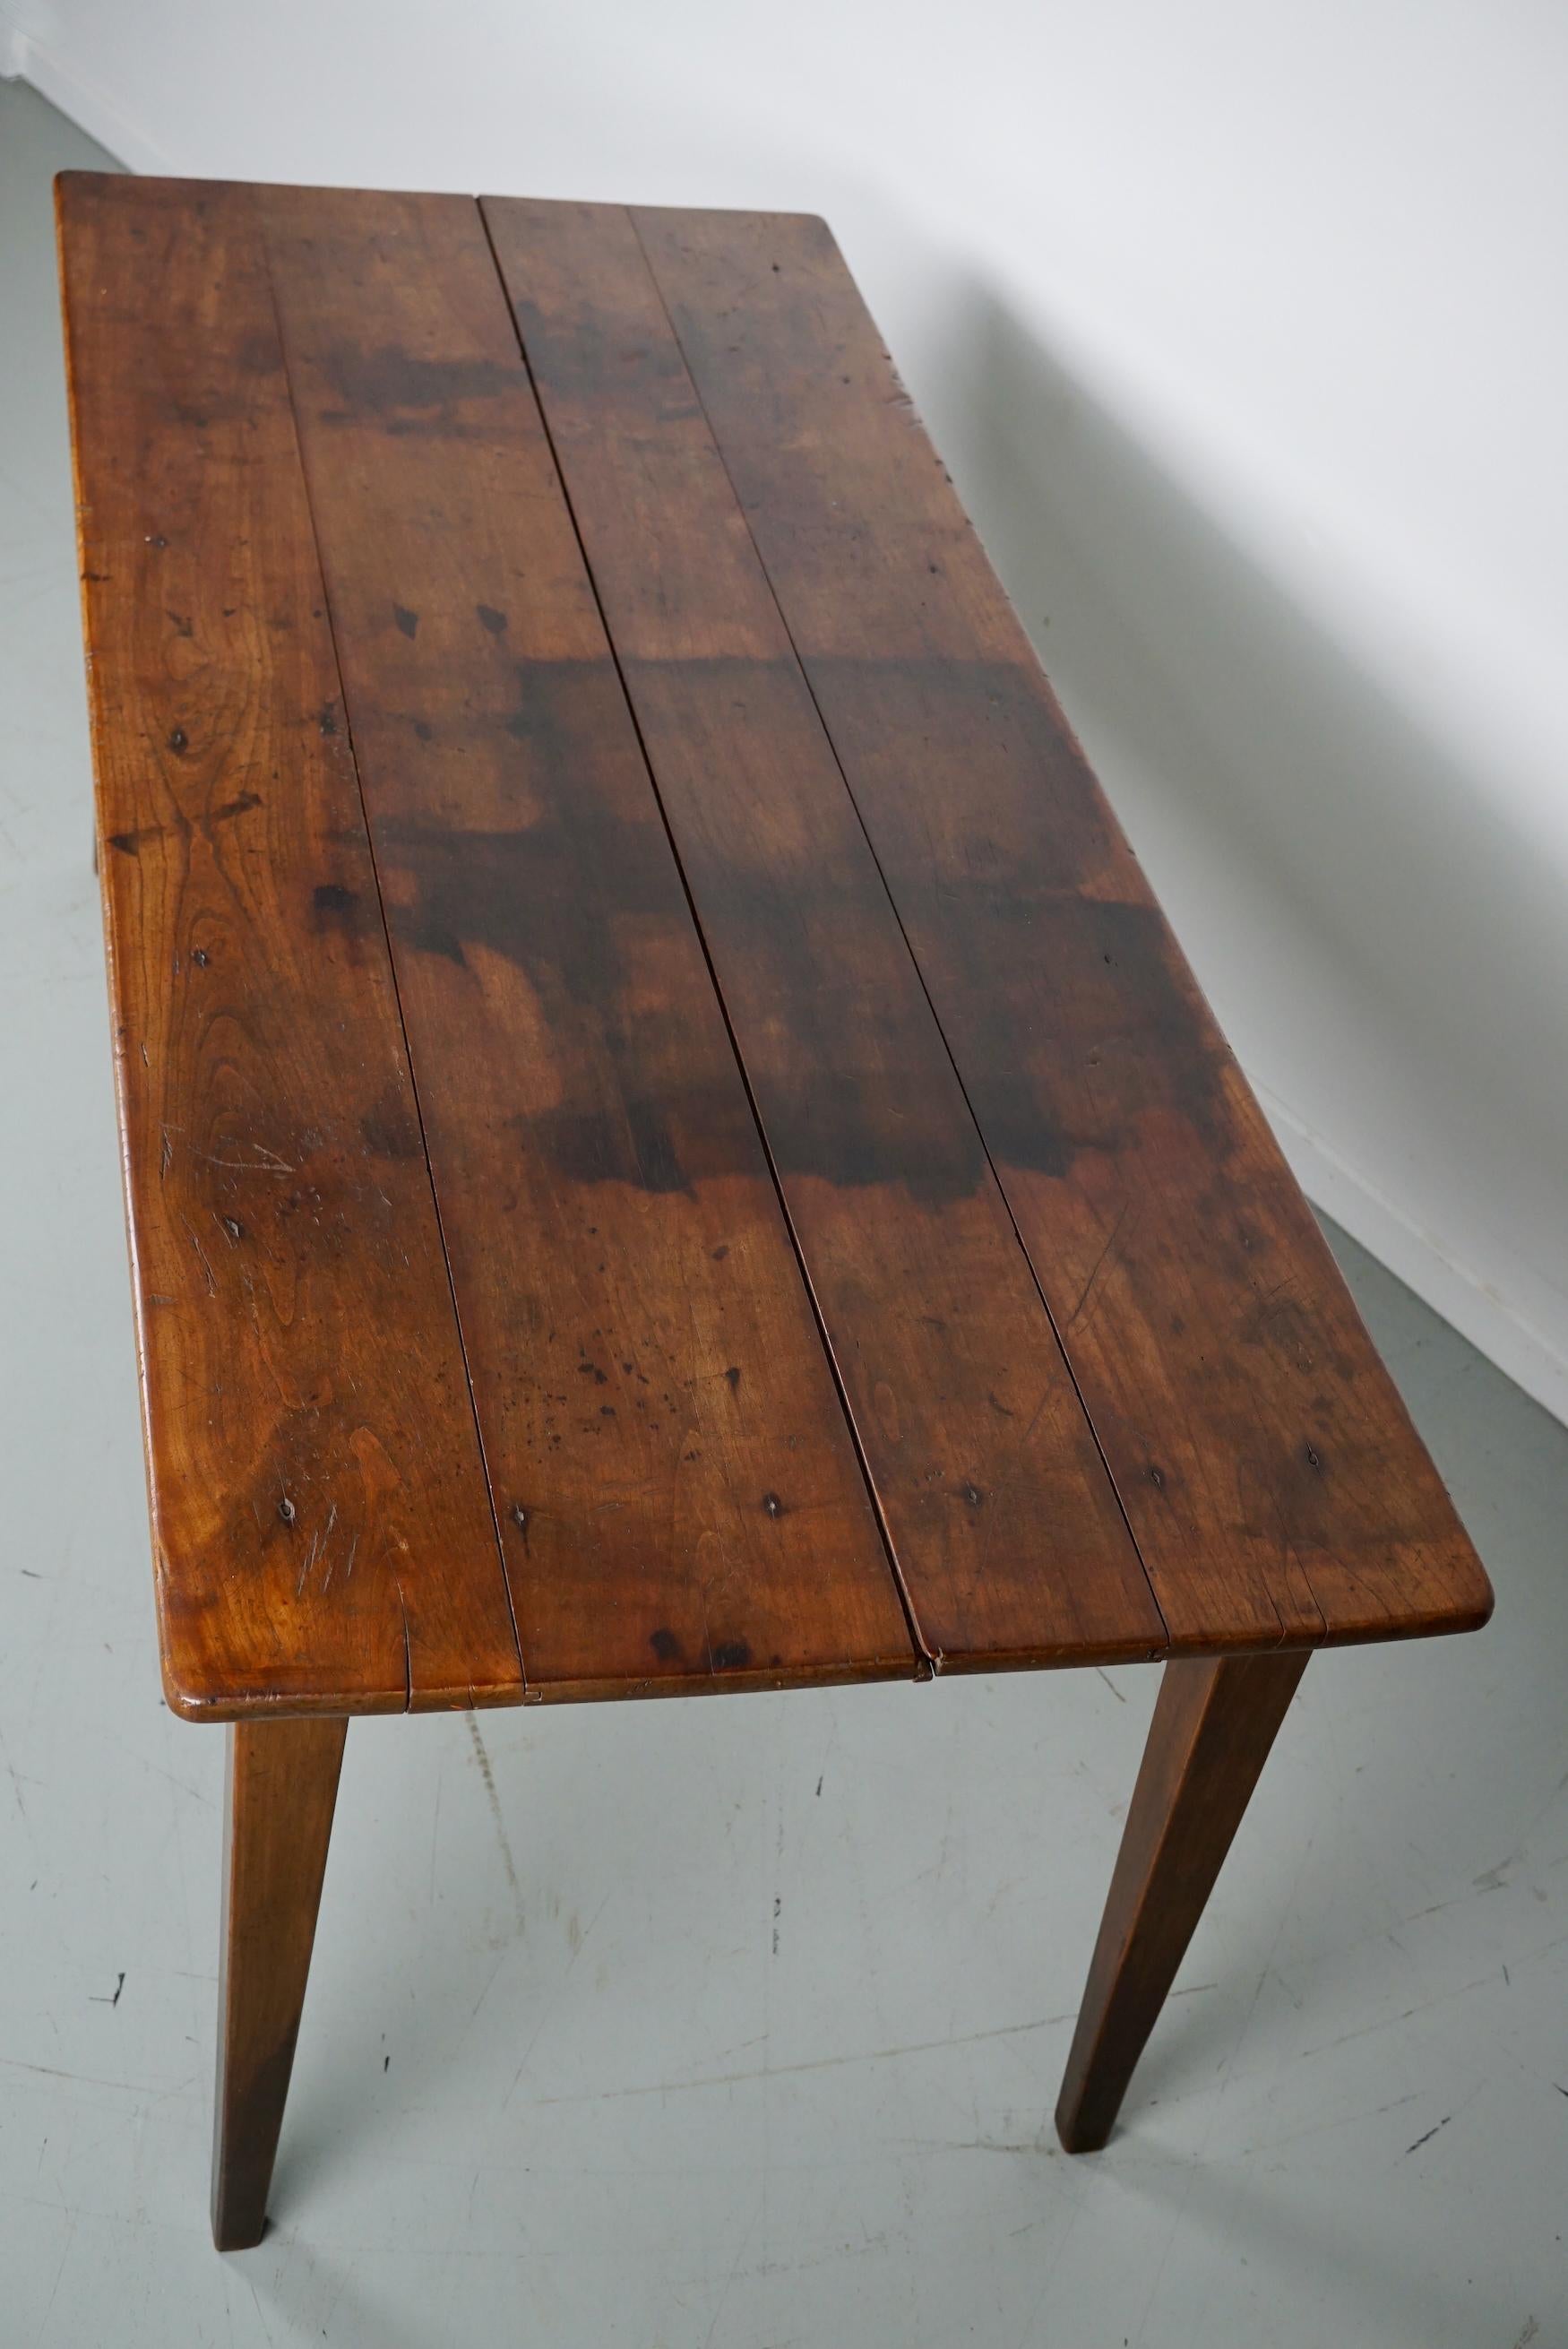 This elegant table was made in France in the 19th century. The table was made in fruitwood with beautiful grain patterns. It has a very warm light color and the table shows many marks of use, old repairs and a has a great patina. The knee height is